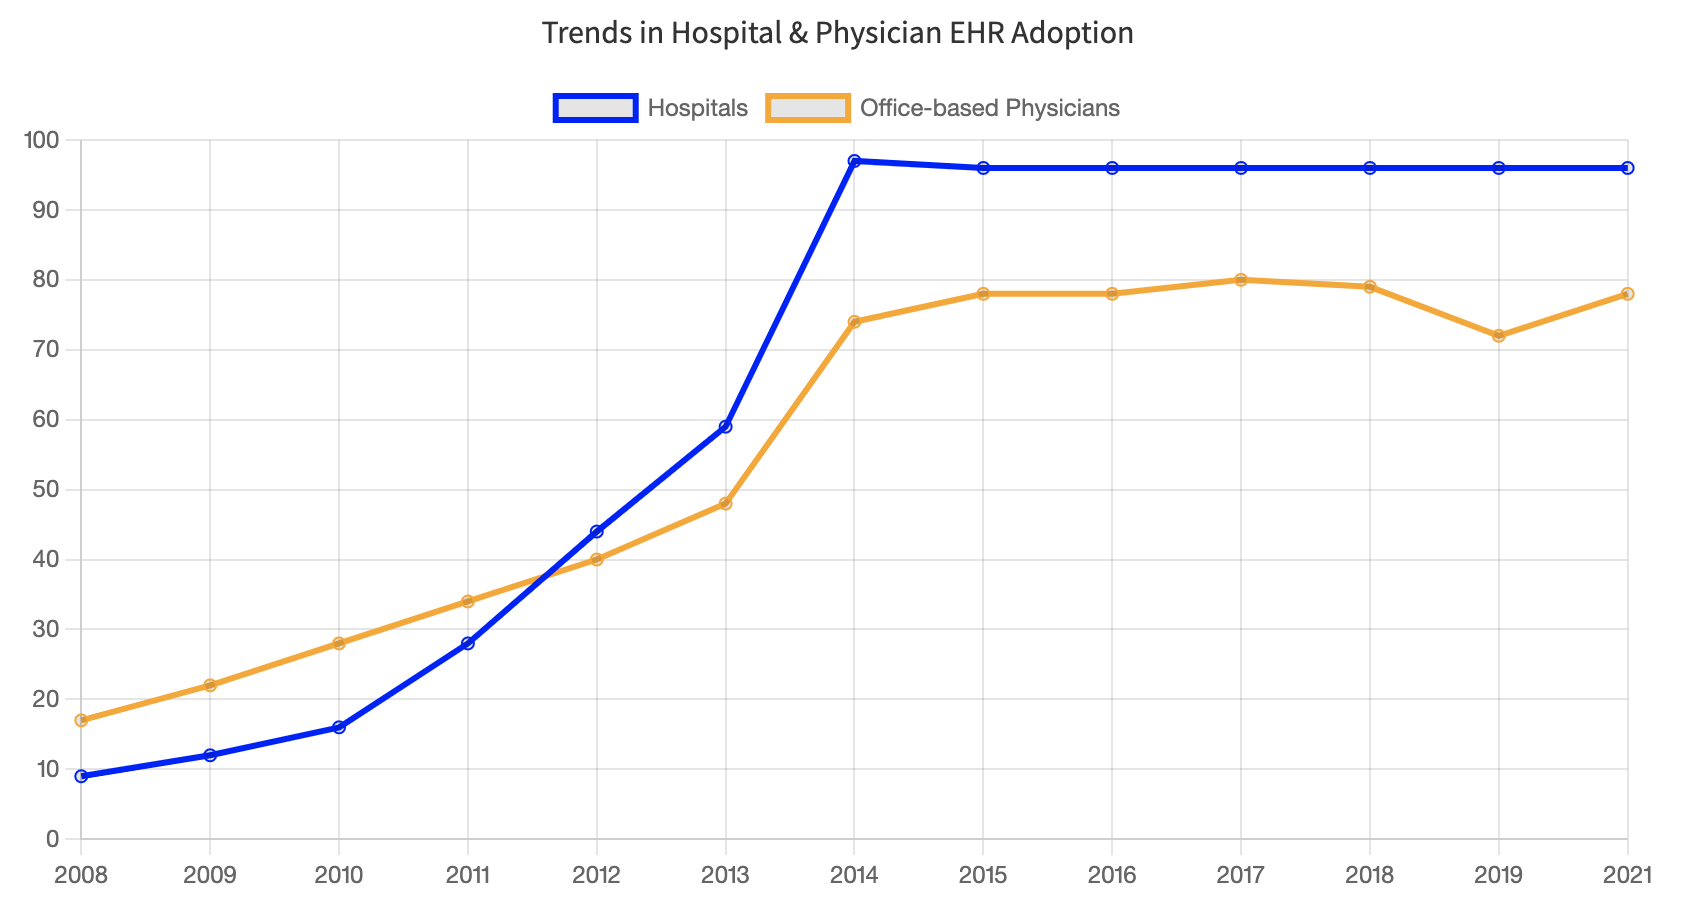 A line graph showing the percentage of hospitals and office-based physicians in the United States that have adopted an electronic health record system from 2008 to 2021. 